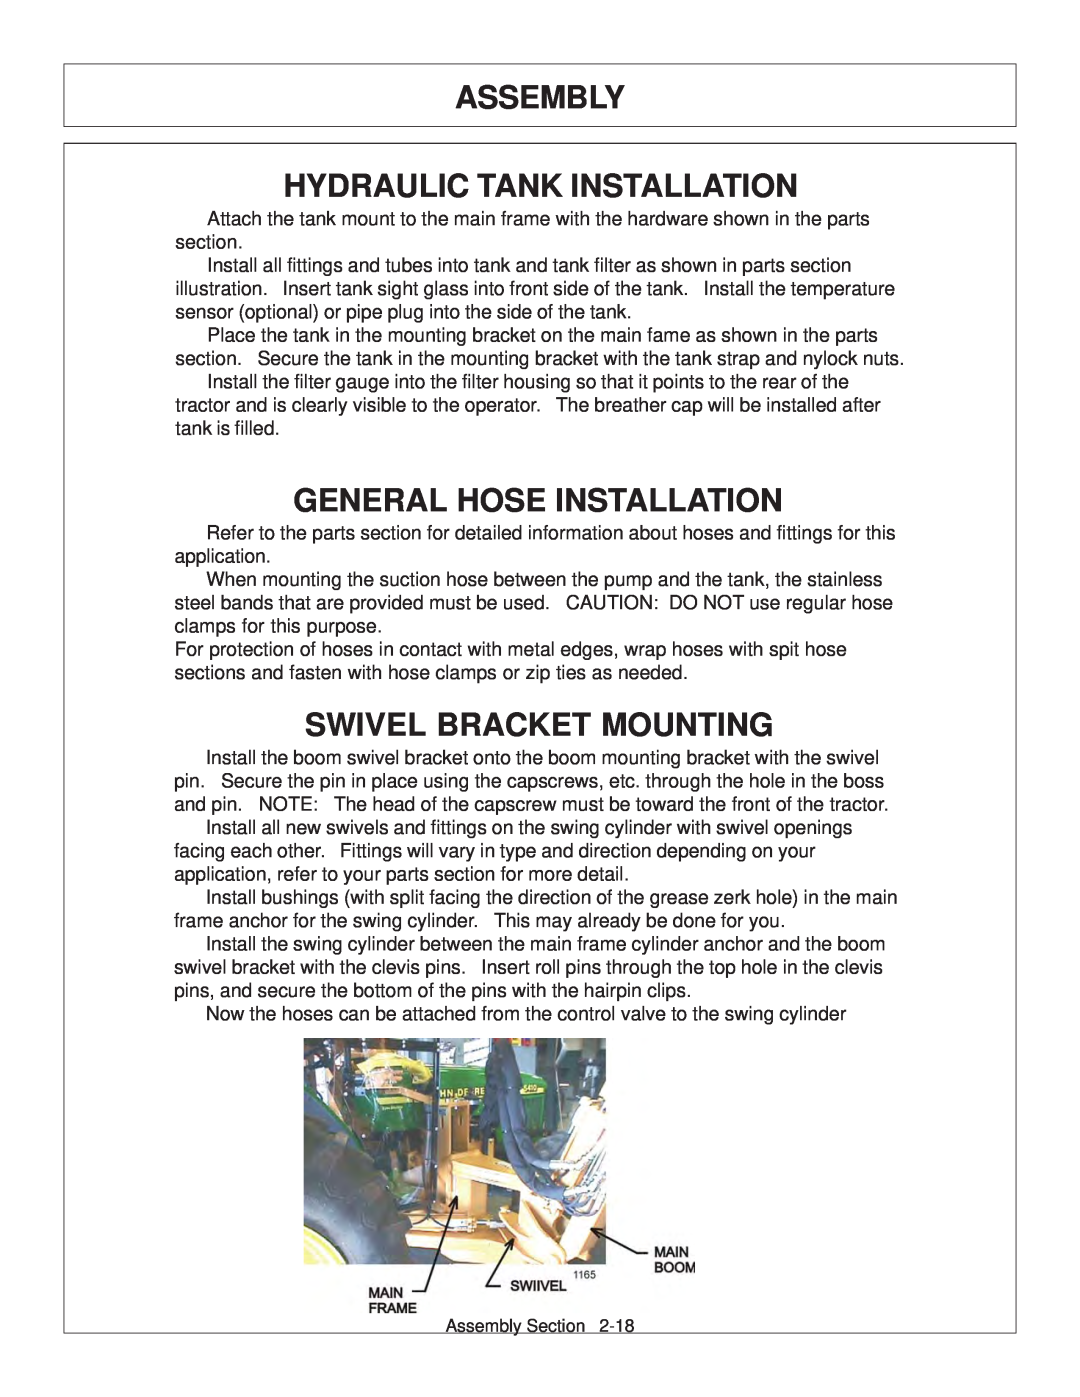 Tiger Products Co., Ltd JD 5083E Assembly Hydraulic Tank Installation, General Hose Installation, Swivel Bracket Mounting 